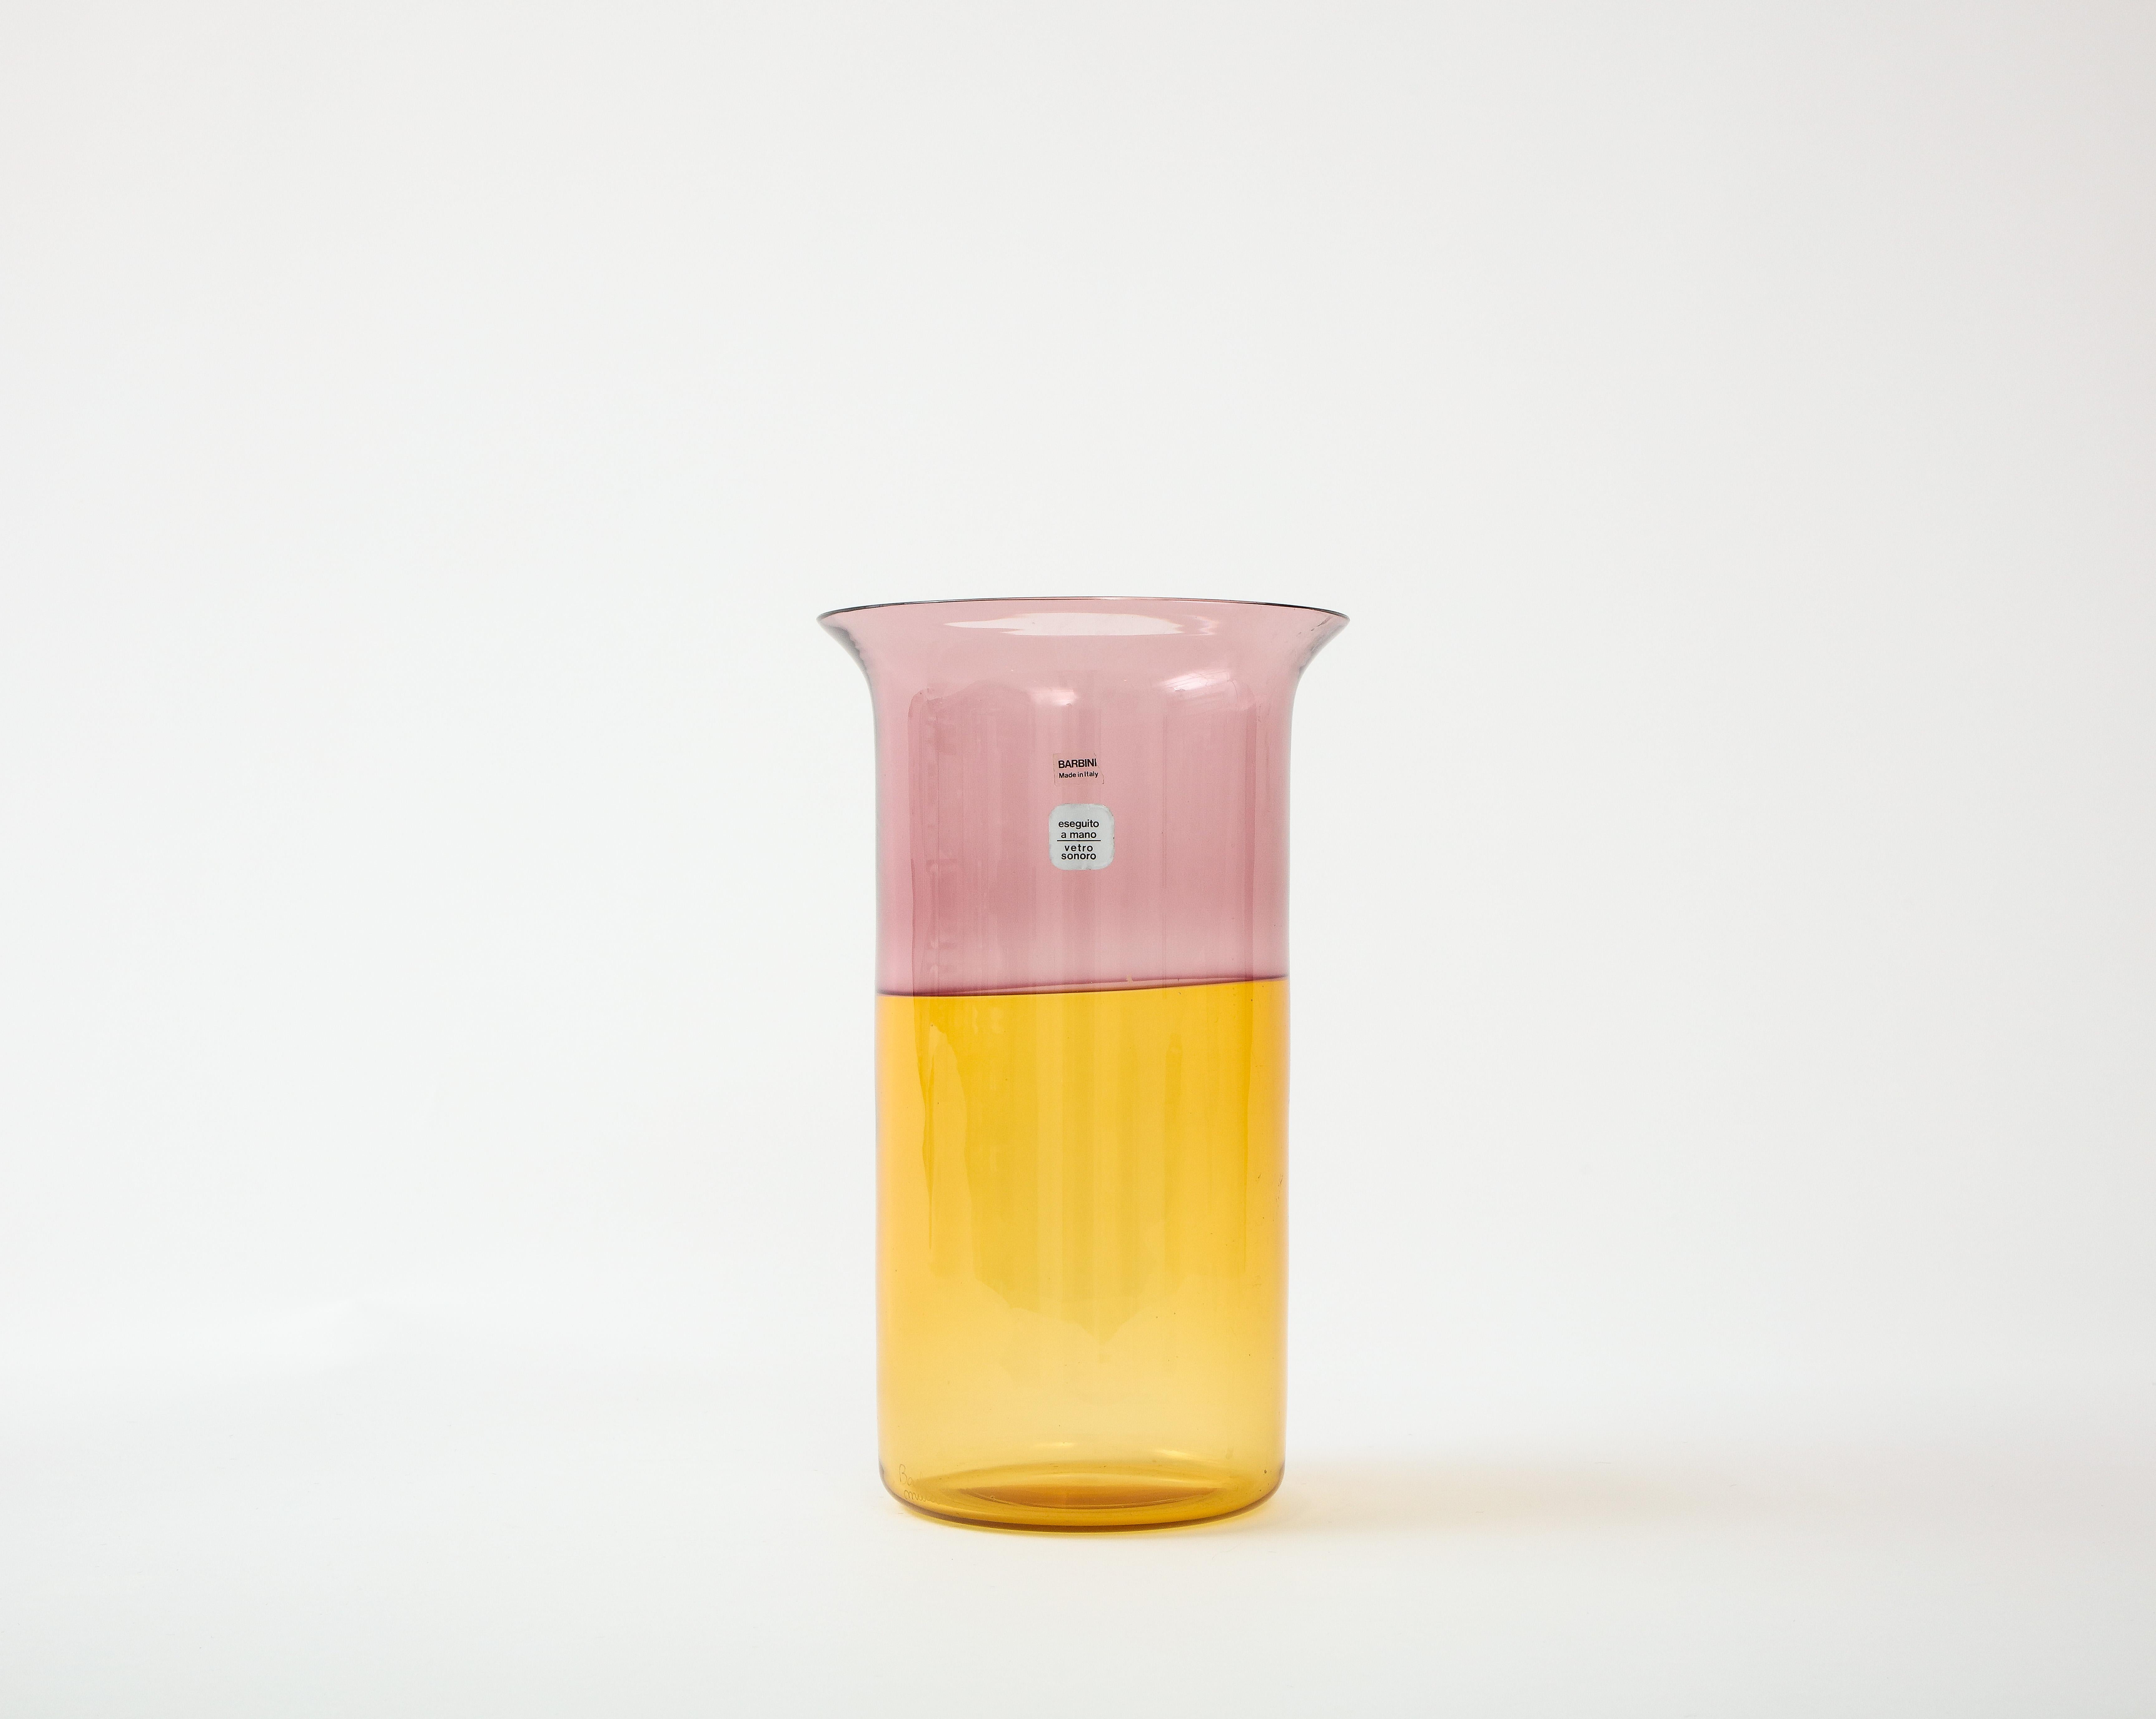 Pristine and authentic example of Alfredo Barbini's highly sought after and rare Italian modernist murano glassware. 

Italian modernist design is exemplified through the color-blocking design with a saturated shade of yellow and pale